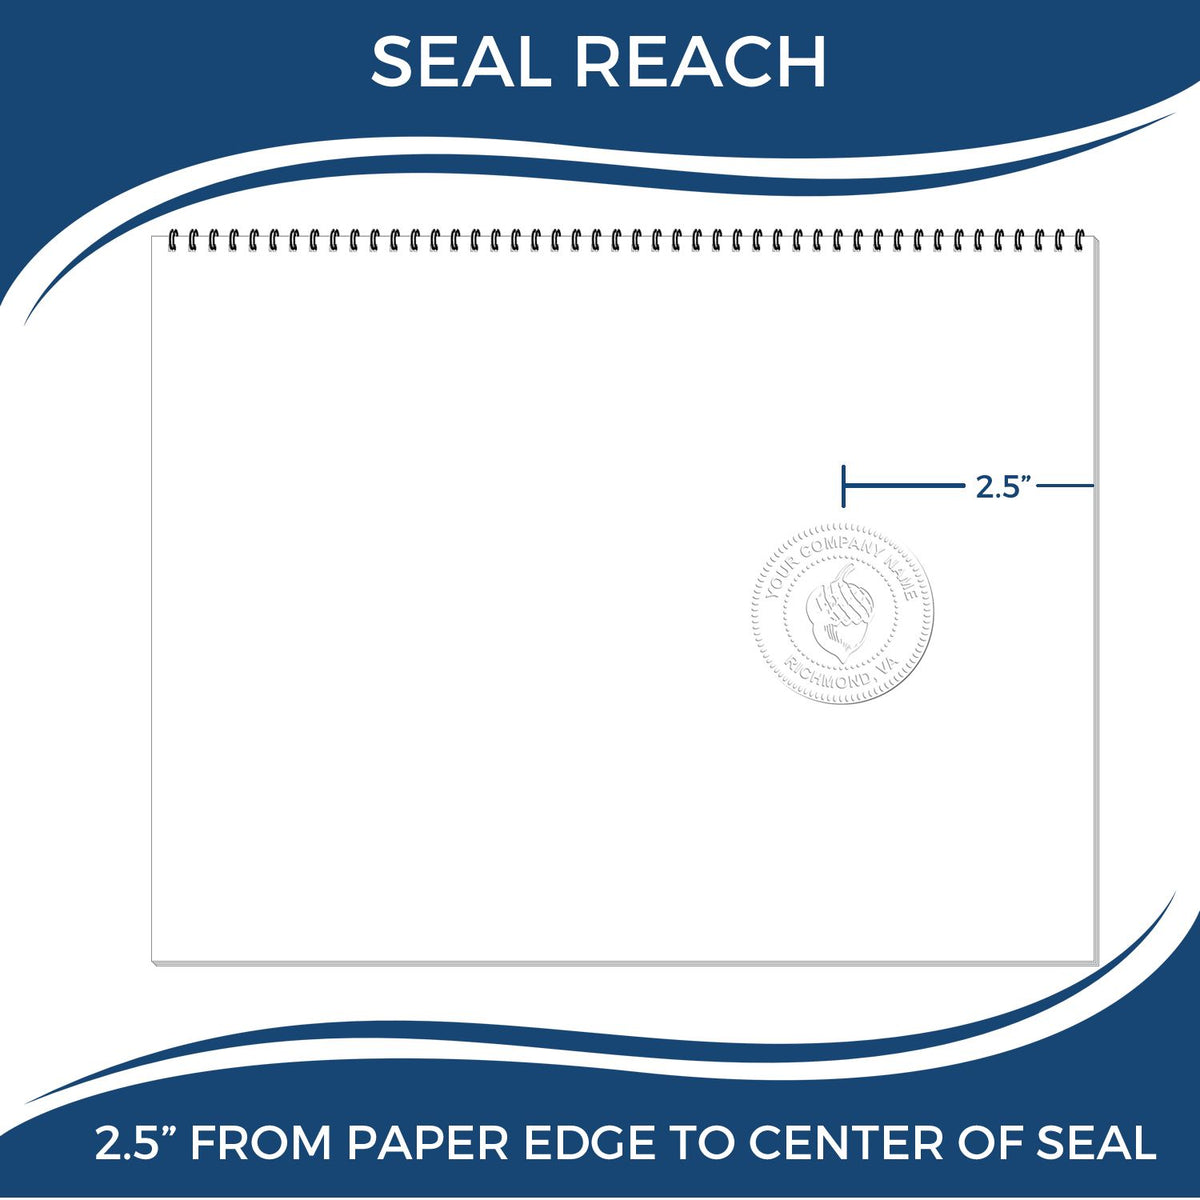 An infographic showing the seal reach which is represented by a ruler and a miniature seal image of the State of Utah Long Reach Architectural Embossing Seal